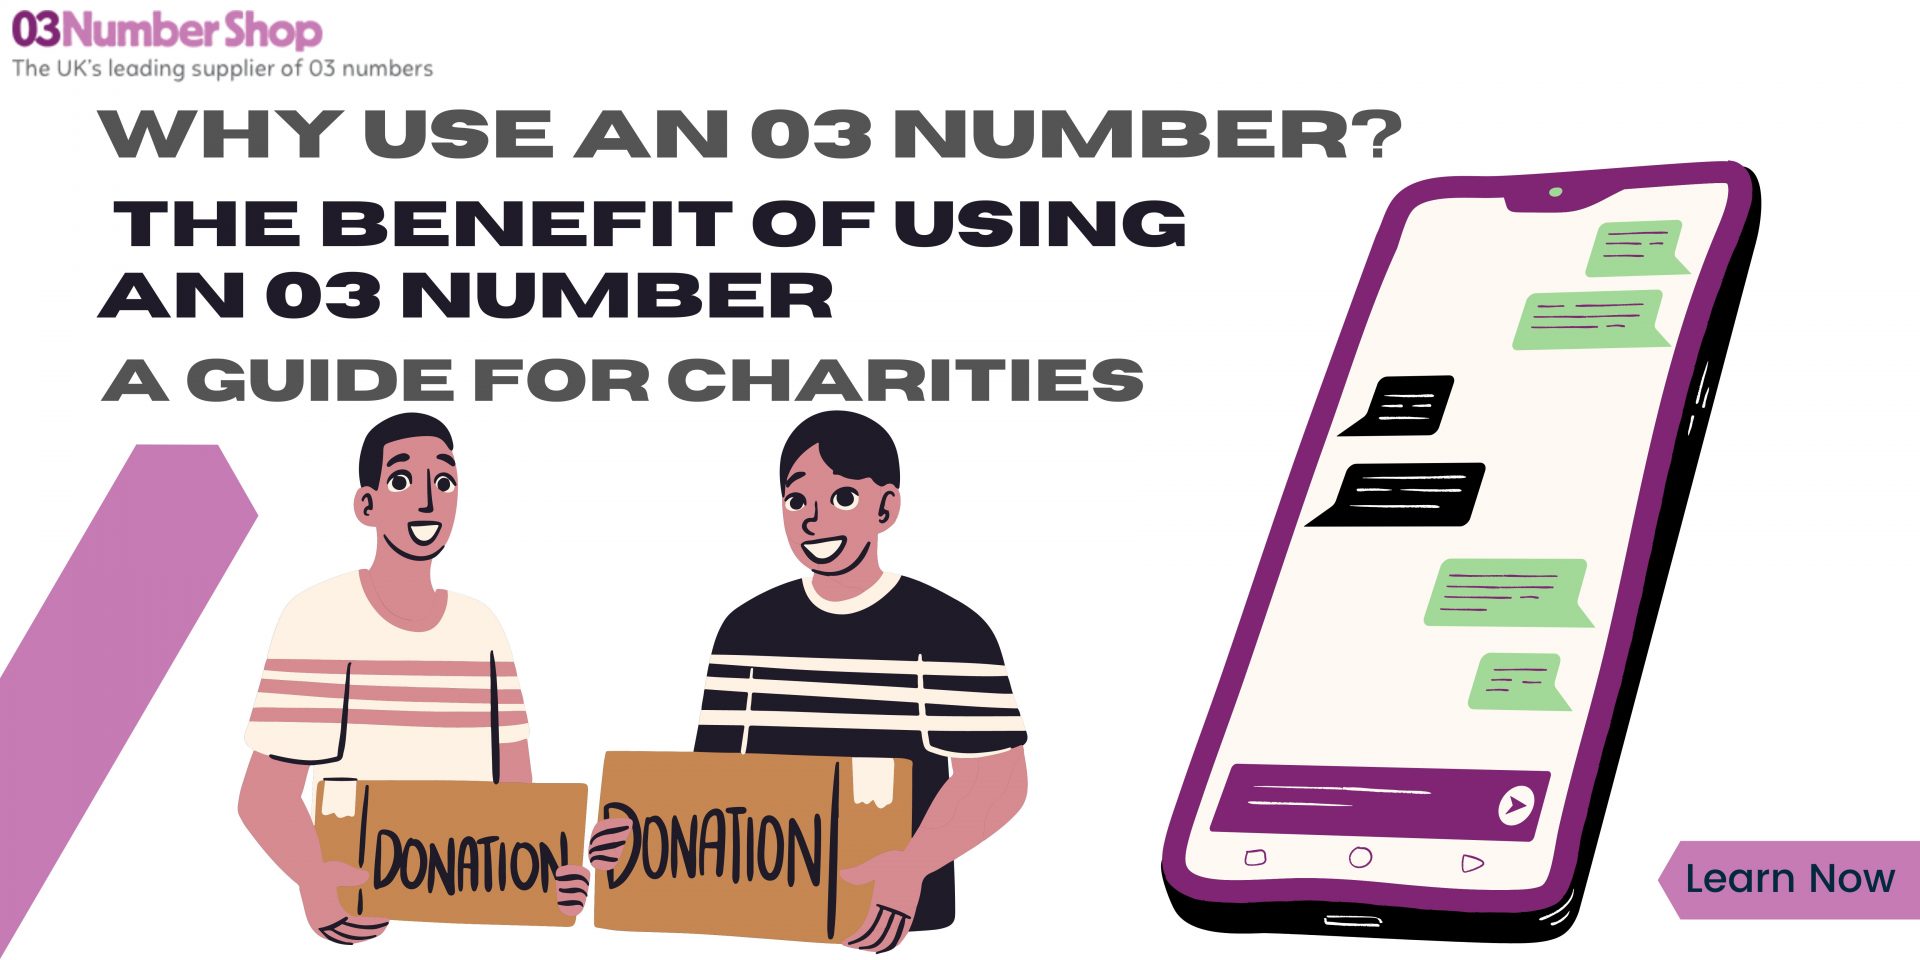 A graphic from 03NumberShop explaining to the public the benefits for a charity of using 03 numbers.